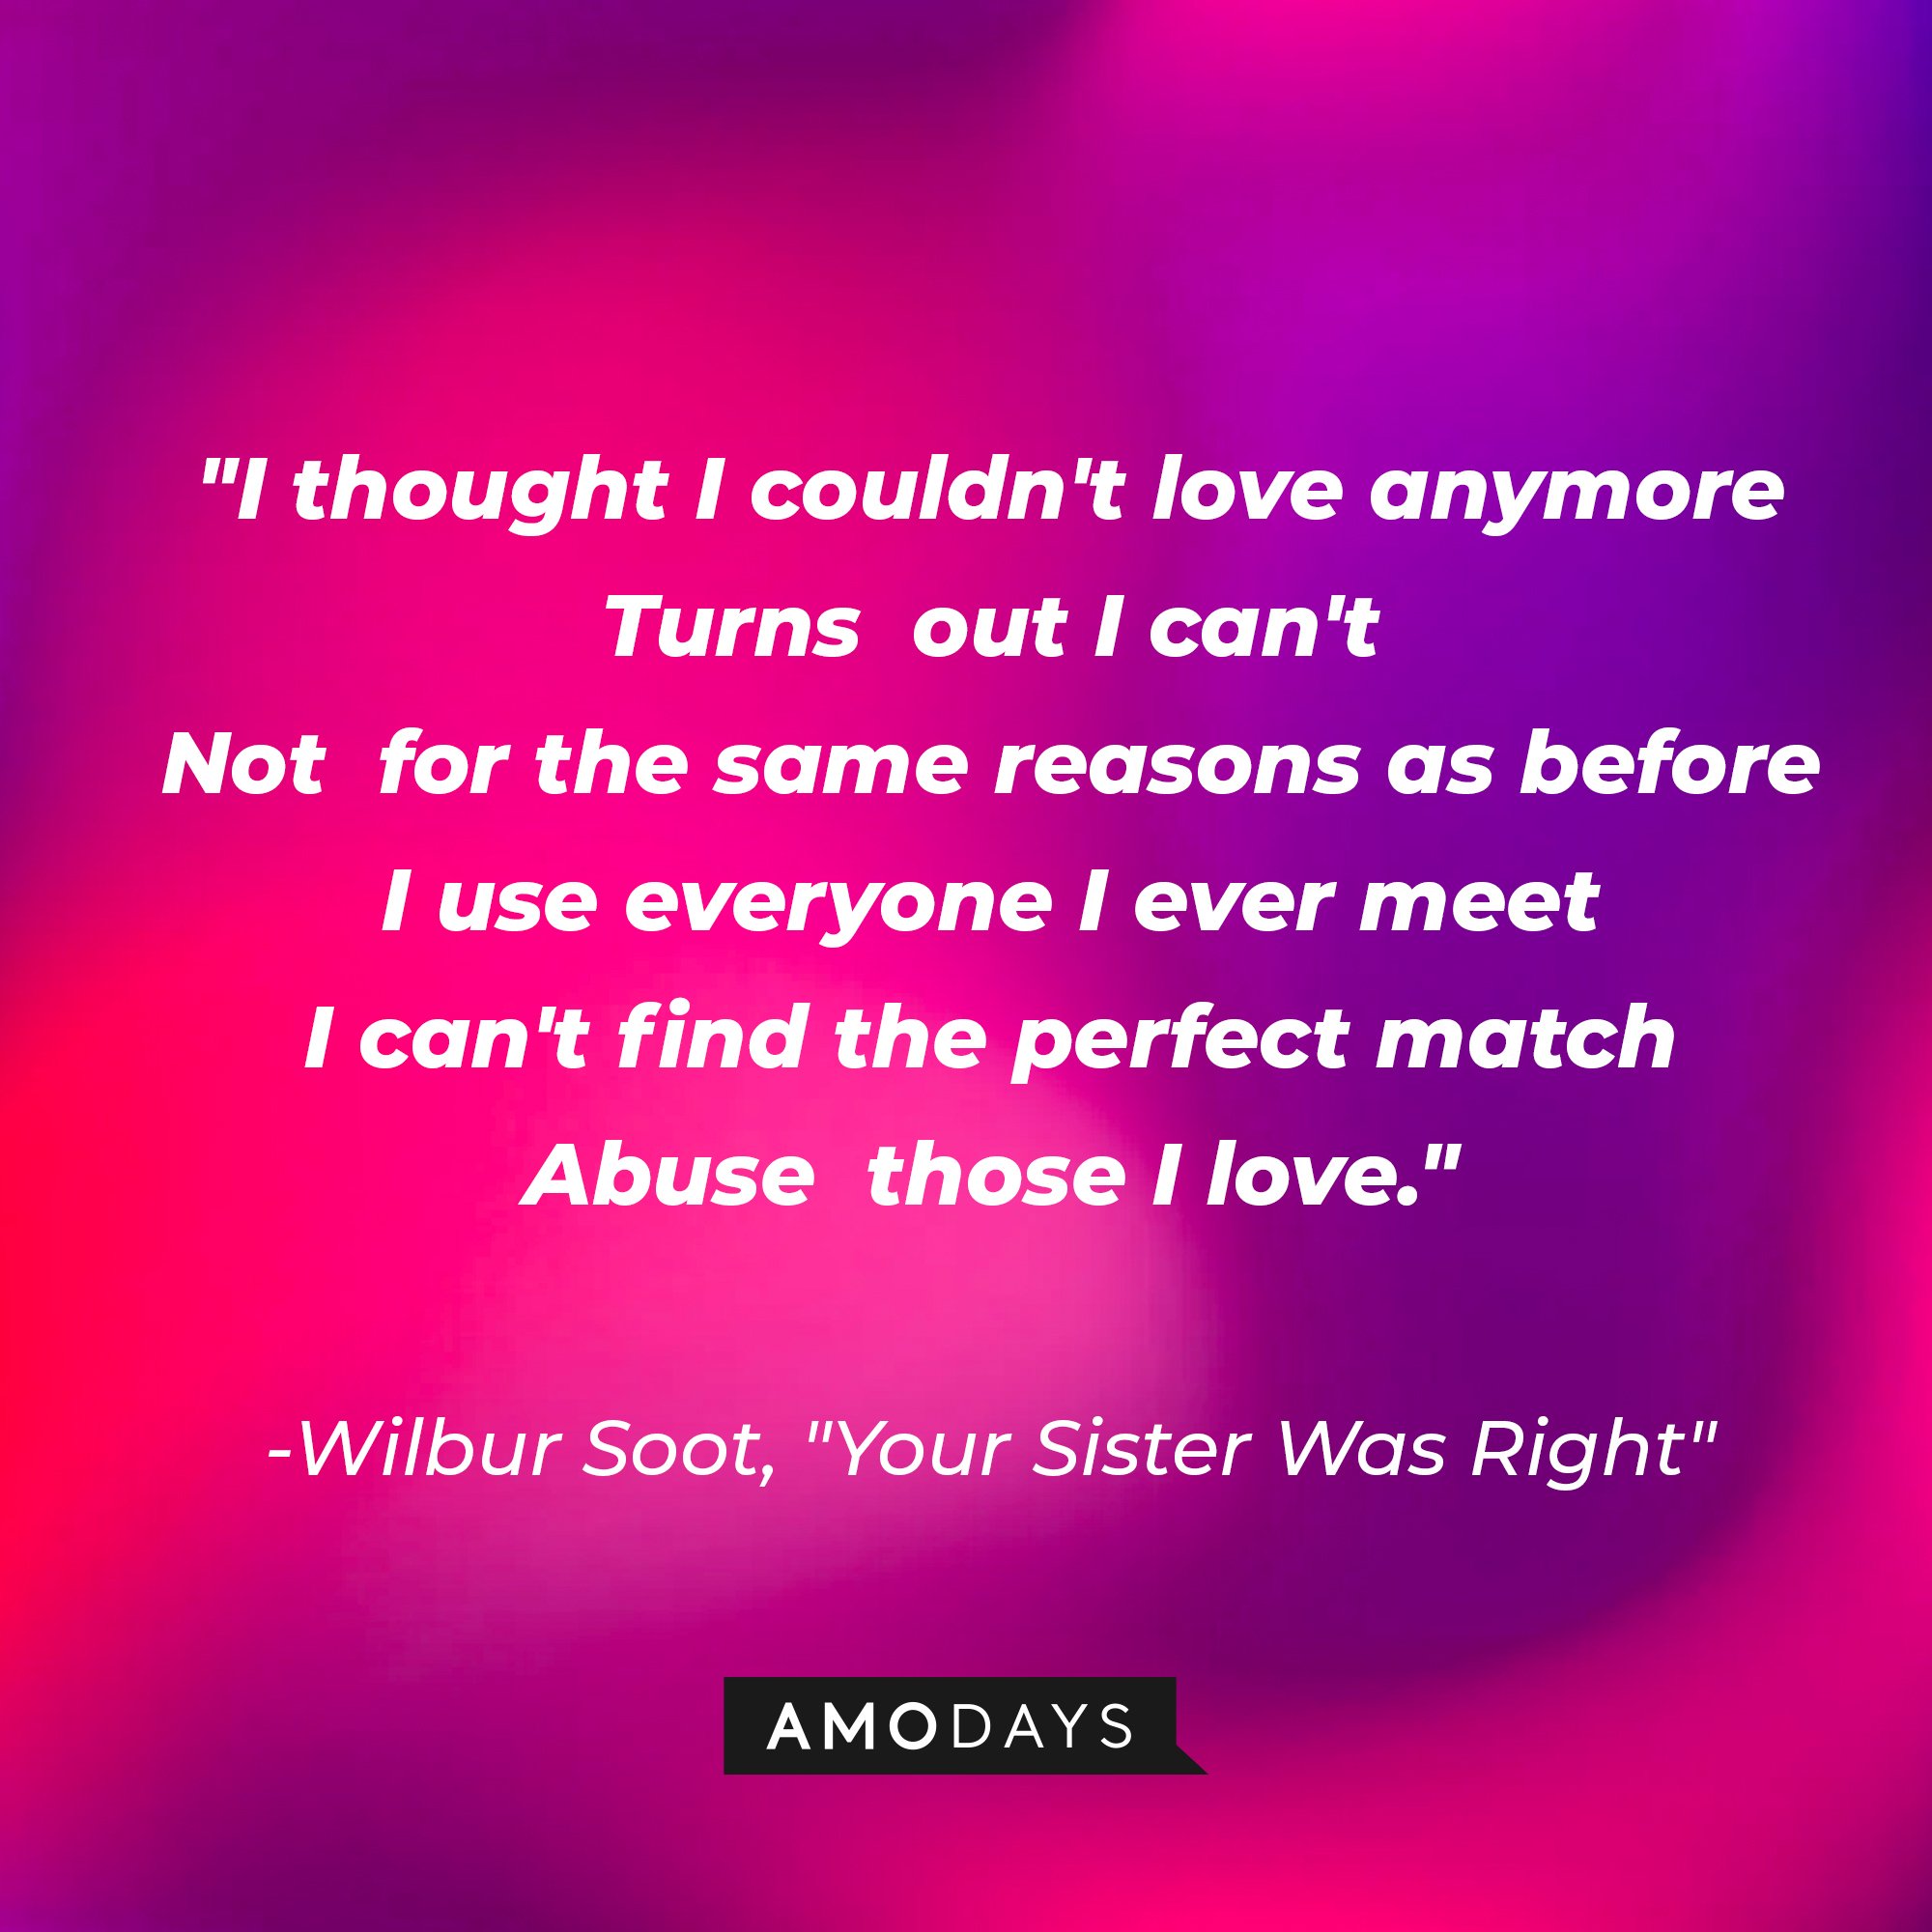 Wilbur Soot's quote: "I thought I couldn't love anymore/ Turns out I can't/ Not for the same reasons as before/ I use everyone I ever meet/ I can't find the perfect match/ Abuse those I love." | Image: AmoDays